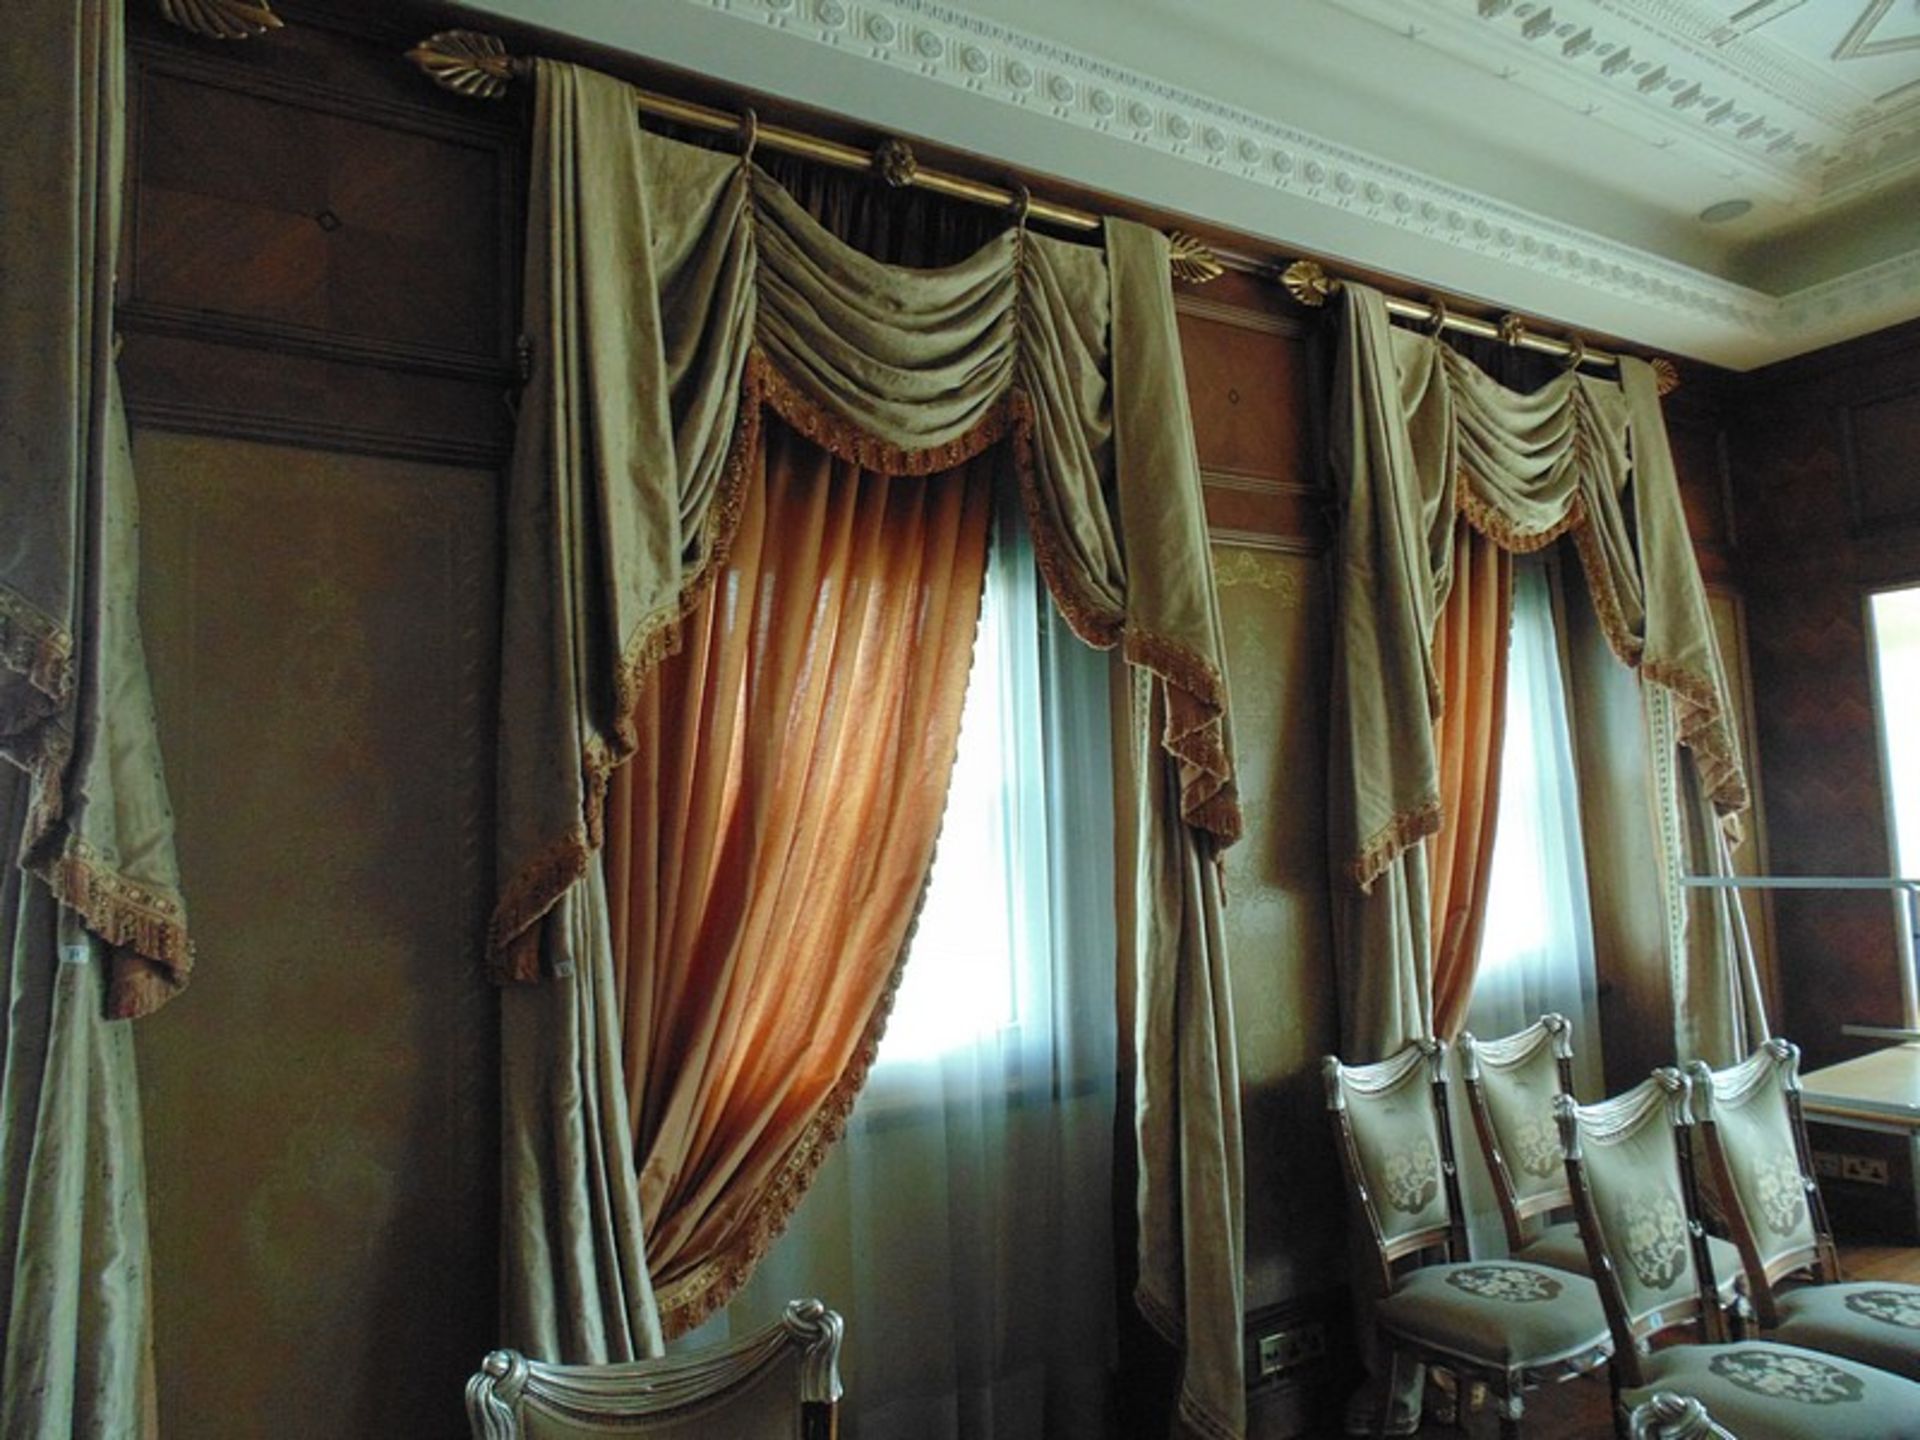 A pair of gold and burgundy curtains supplied by Jacquard from Rudolph Ackermann`s A series design